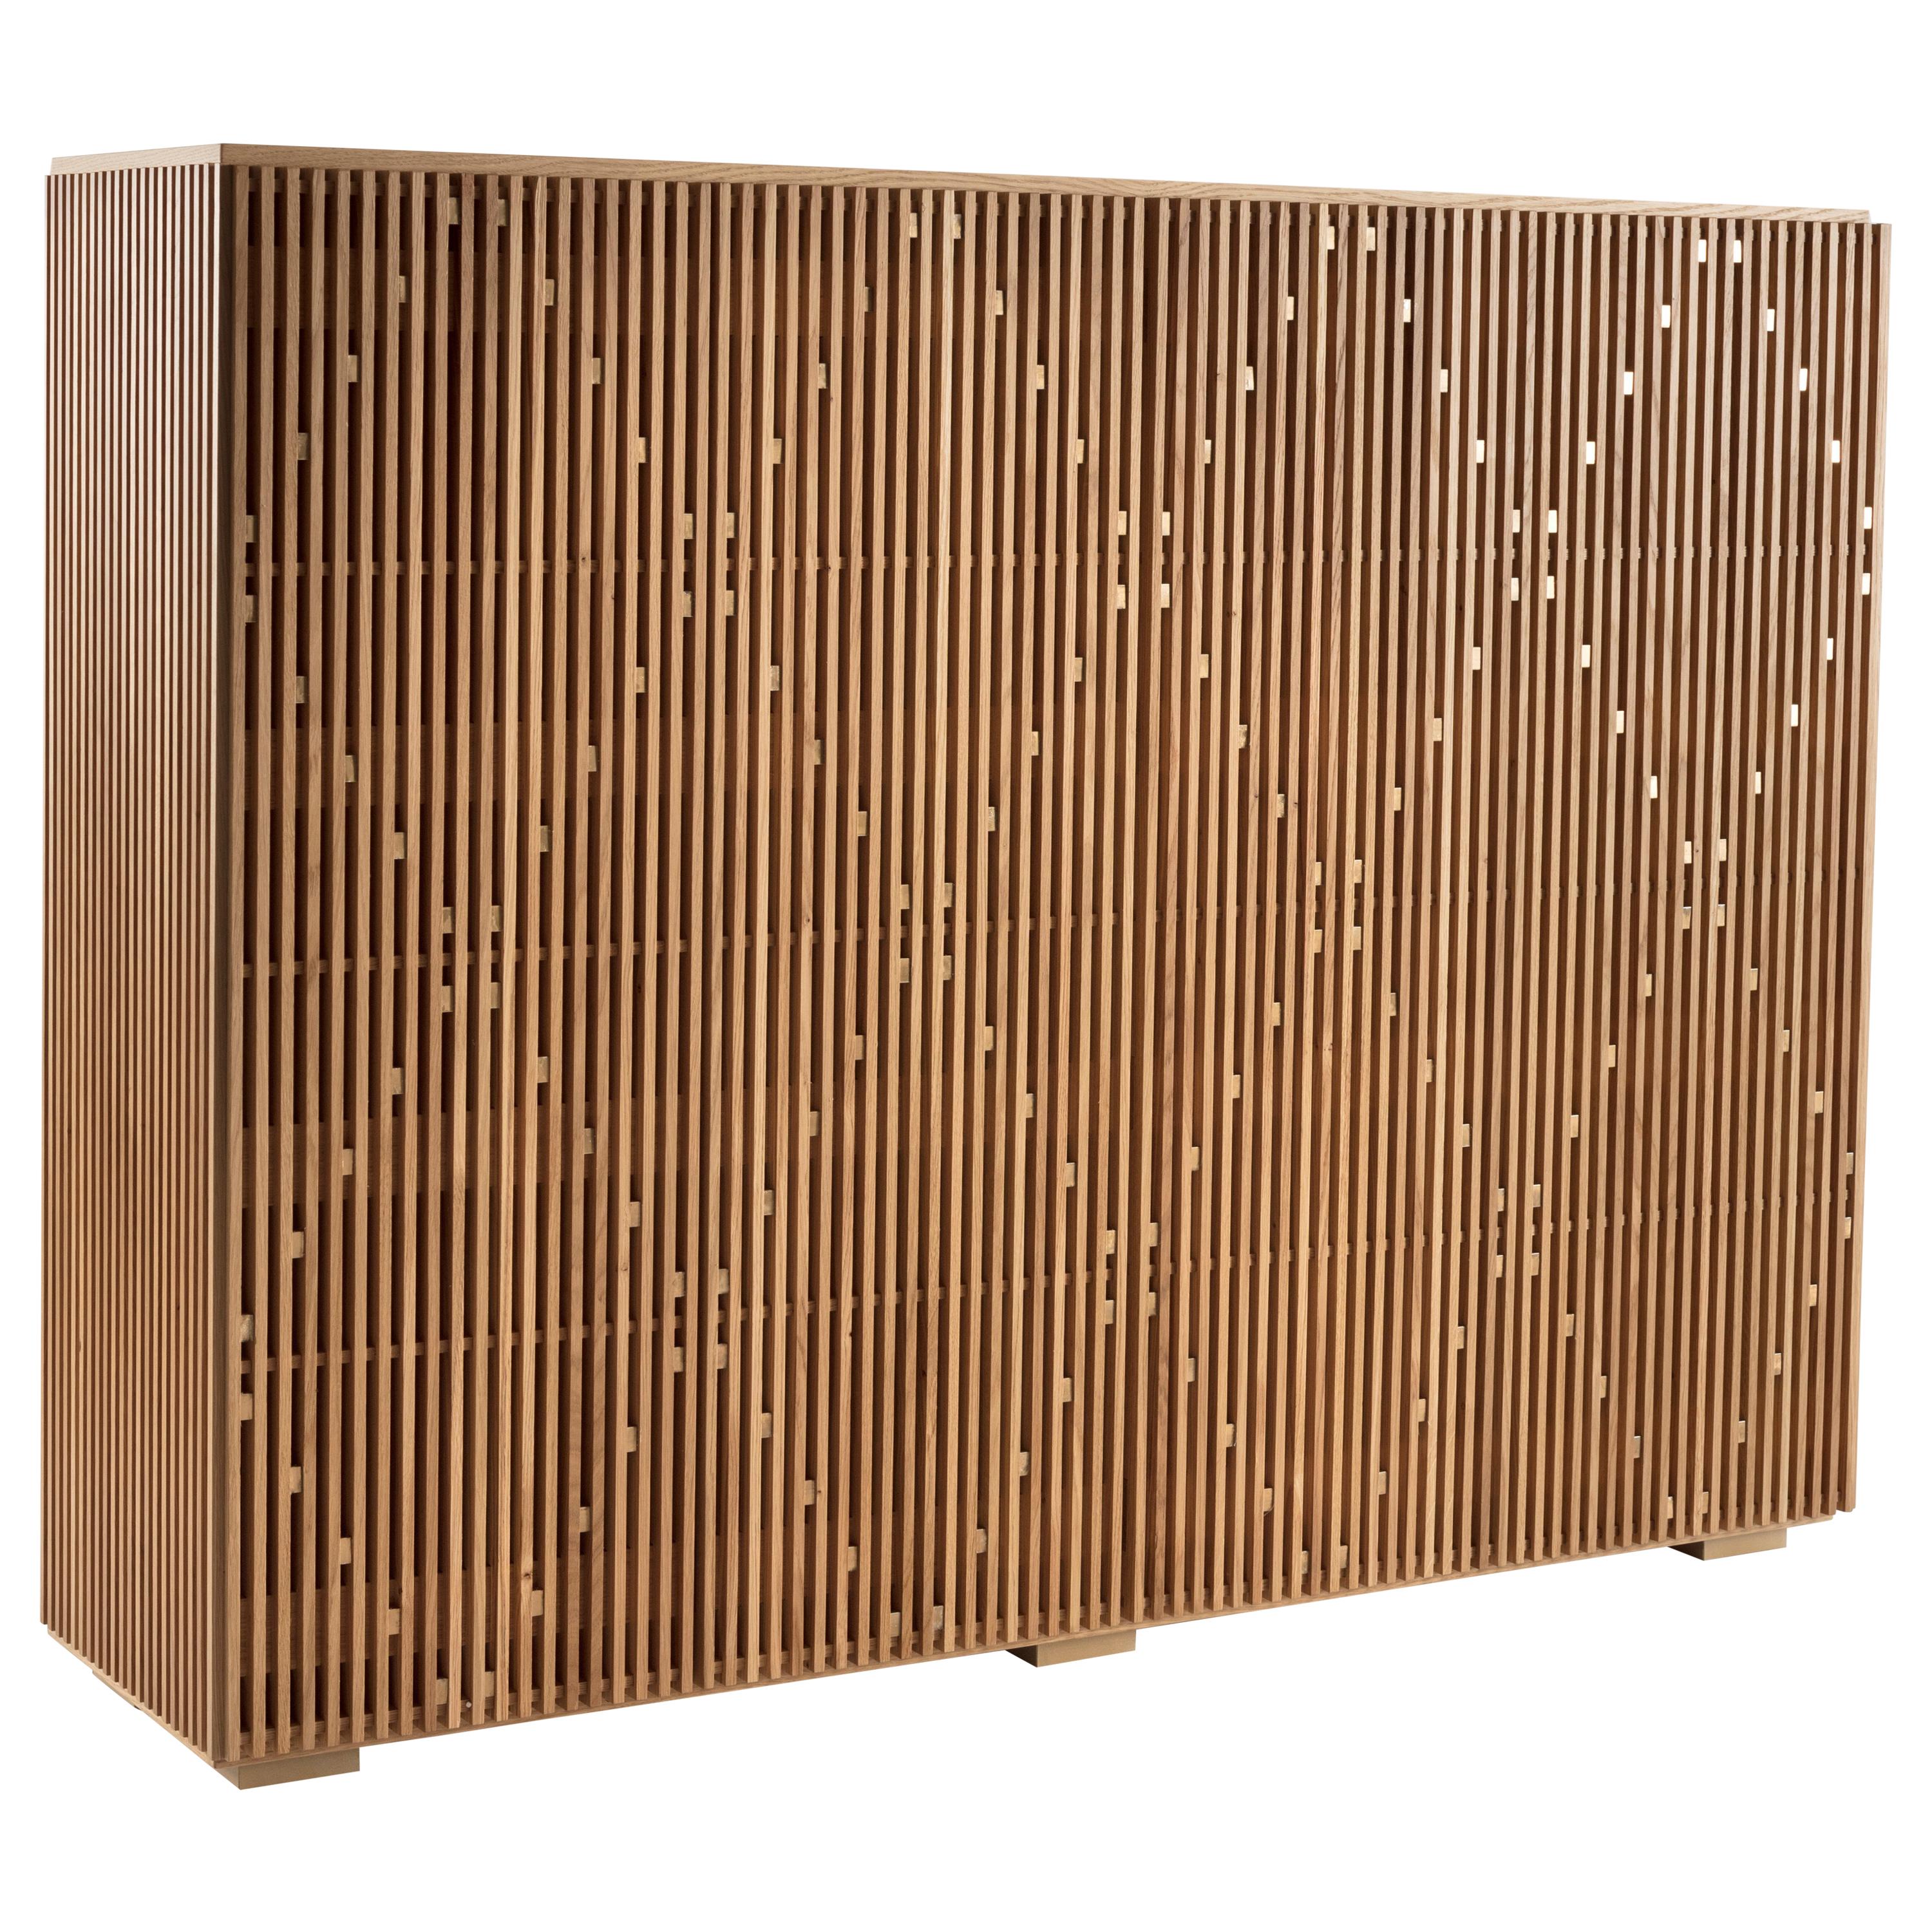 Cabinet, sideboard or container by Debonademeo for Medulum, Oakwood and Brass For Sale